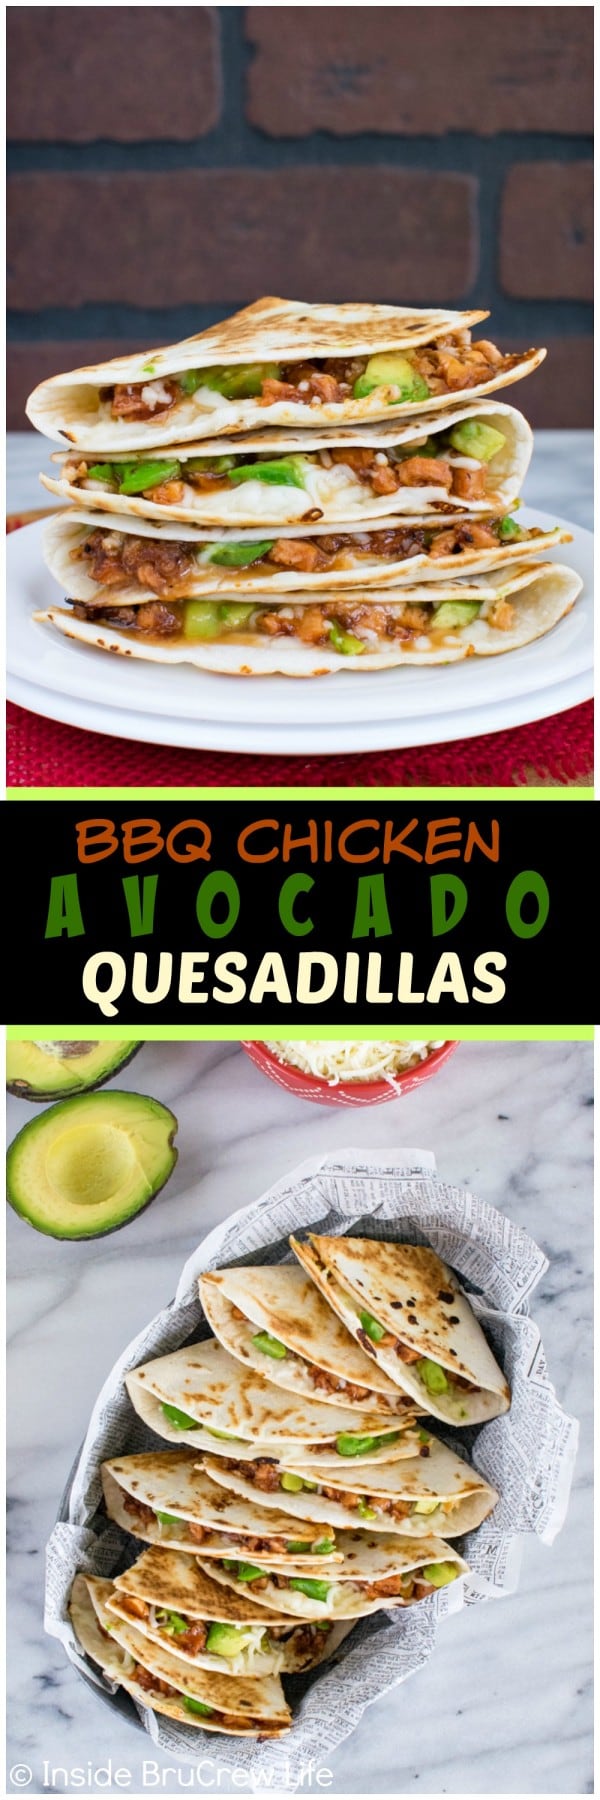 BBQ Chicken & Avocado Quesadillas - melted cheese, barbecue chicken, & avocados make an easy dinner recipe. Great meal idea for busy nights!